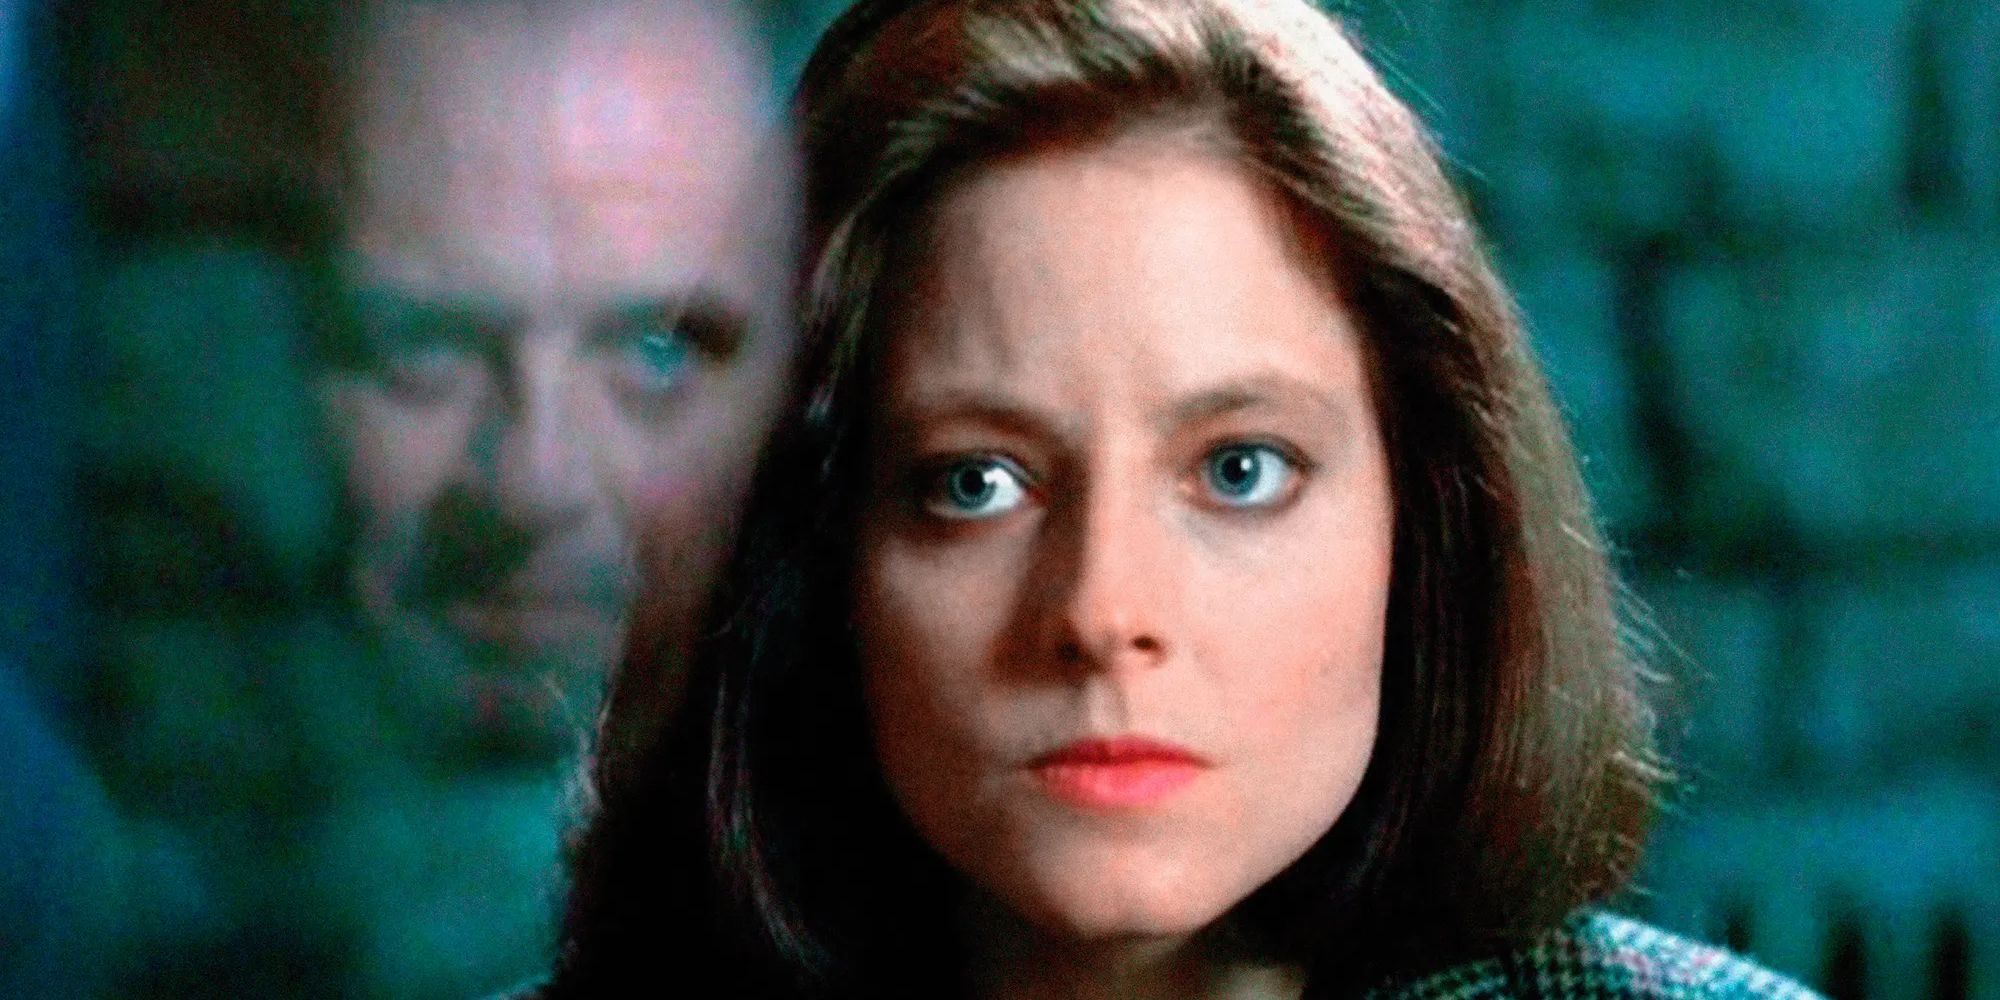 Clarice Starling talking to Hannibal Lecter through a glass window in The Silence of the Lambs